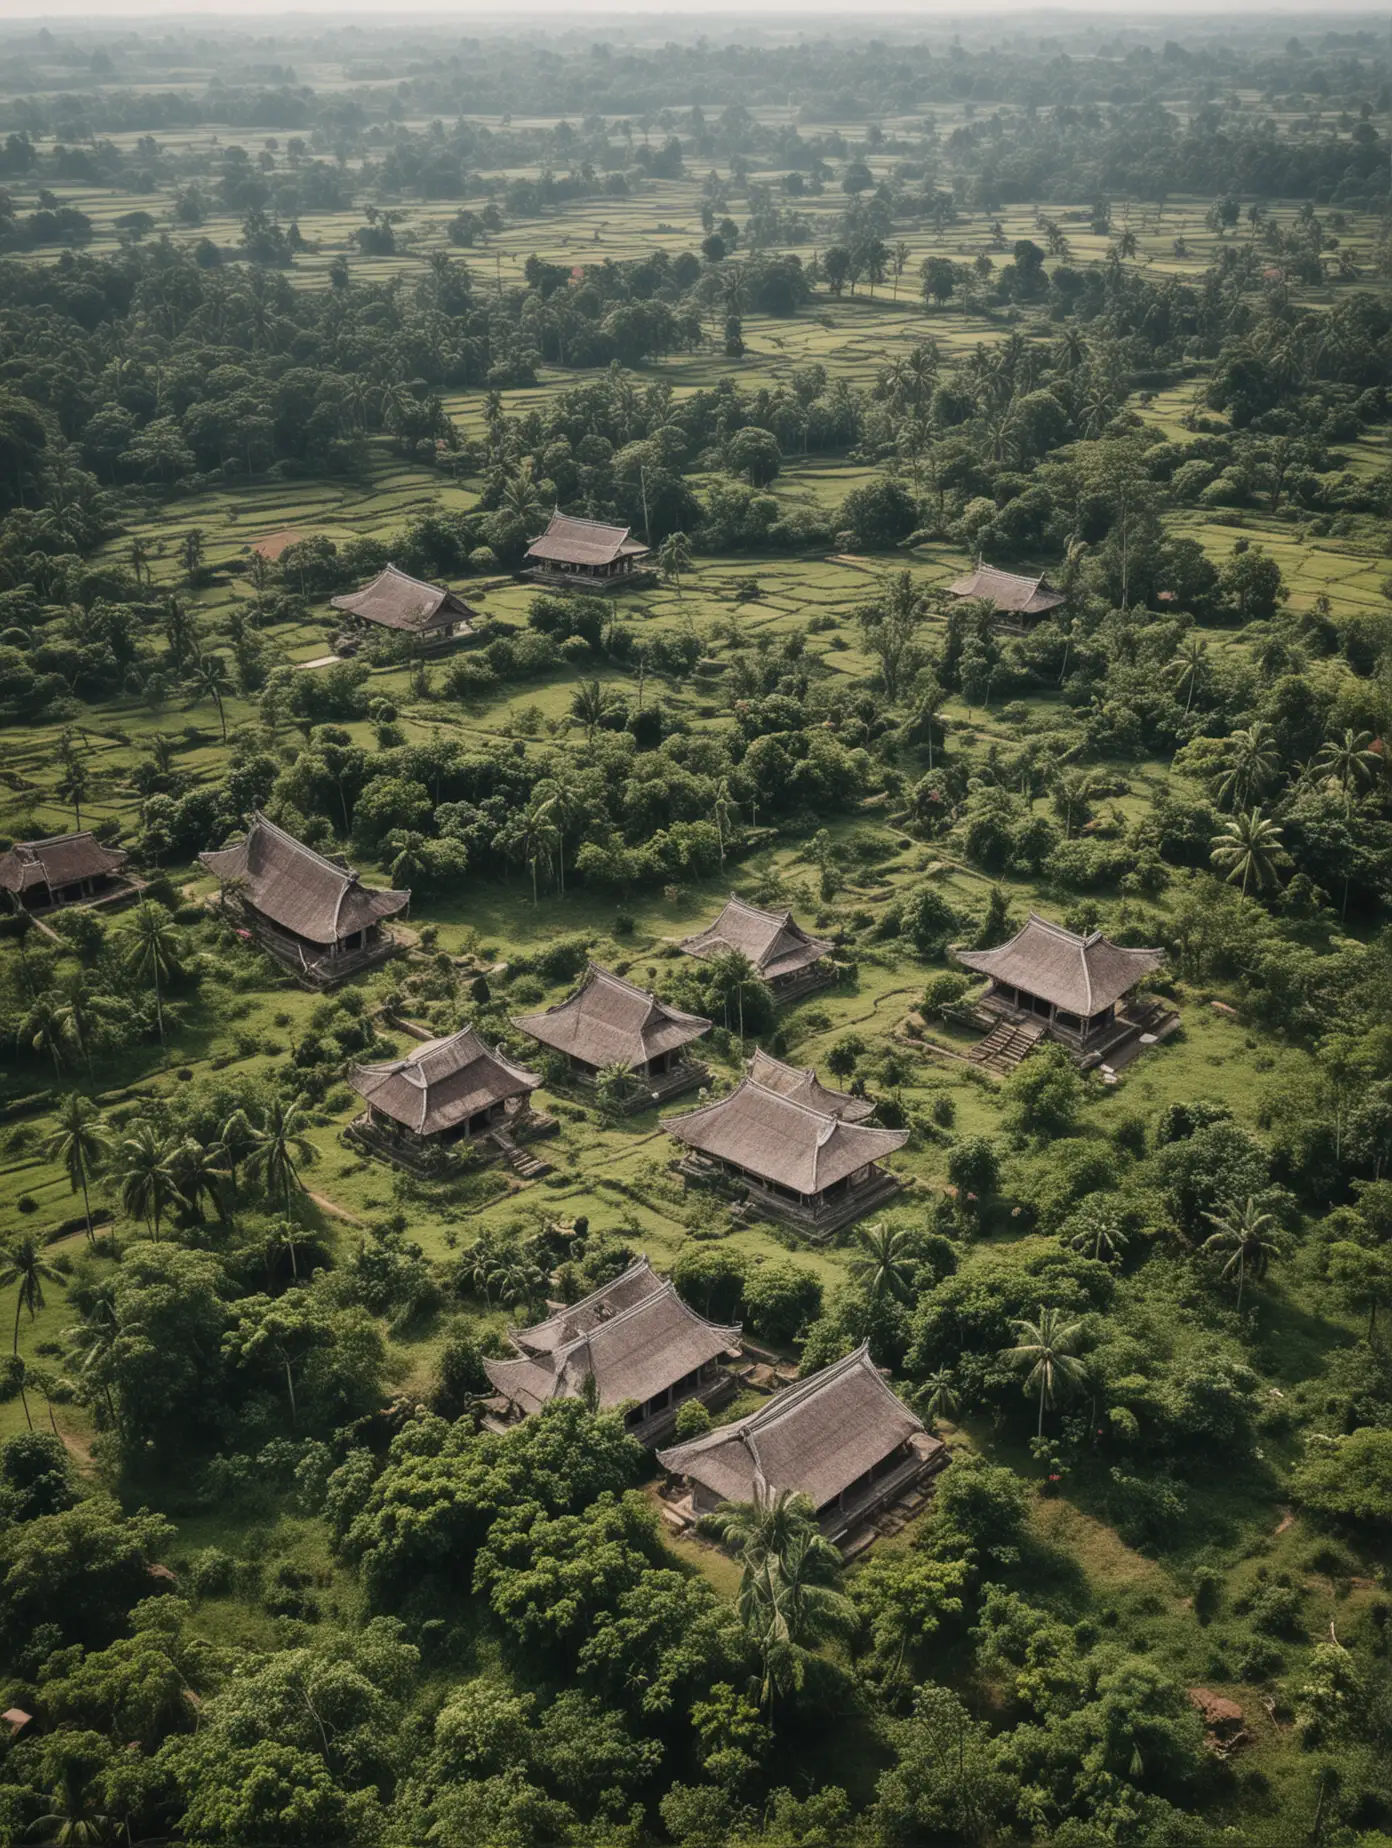 view from above of the countryside with stone temple houses from the era of the Indonesian Mataram kingdom